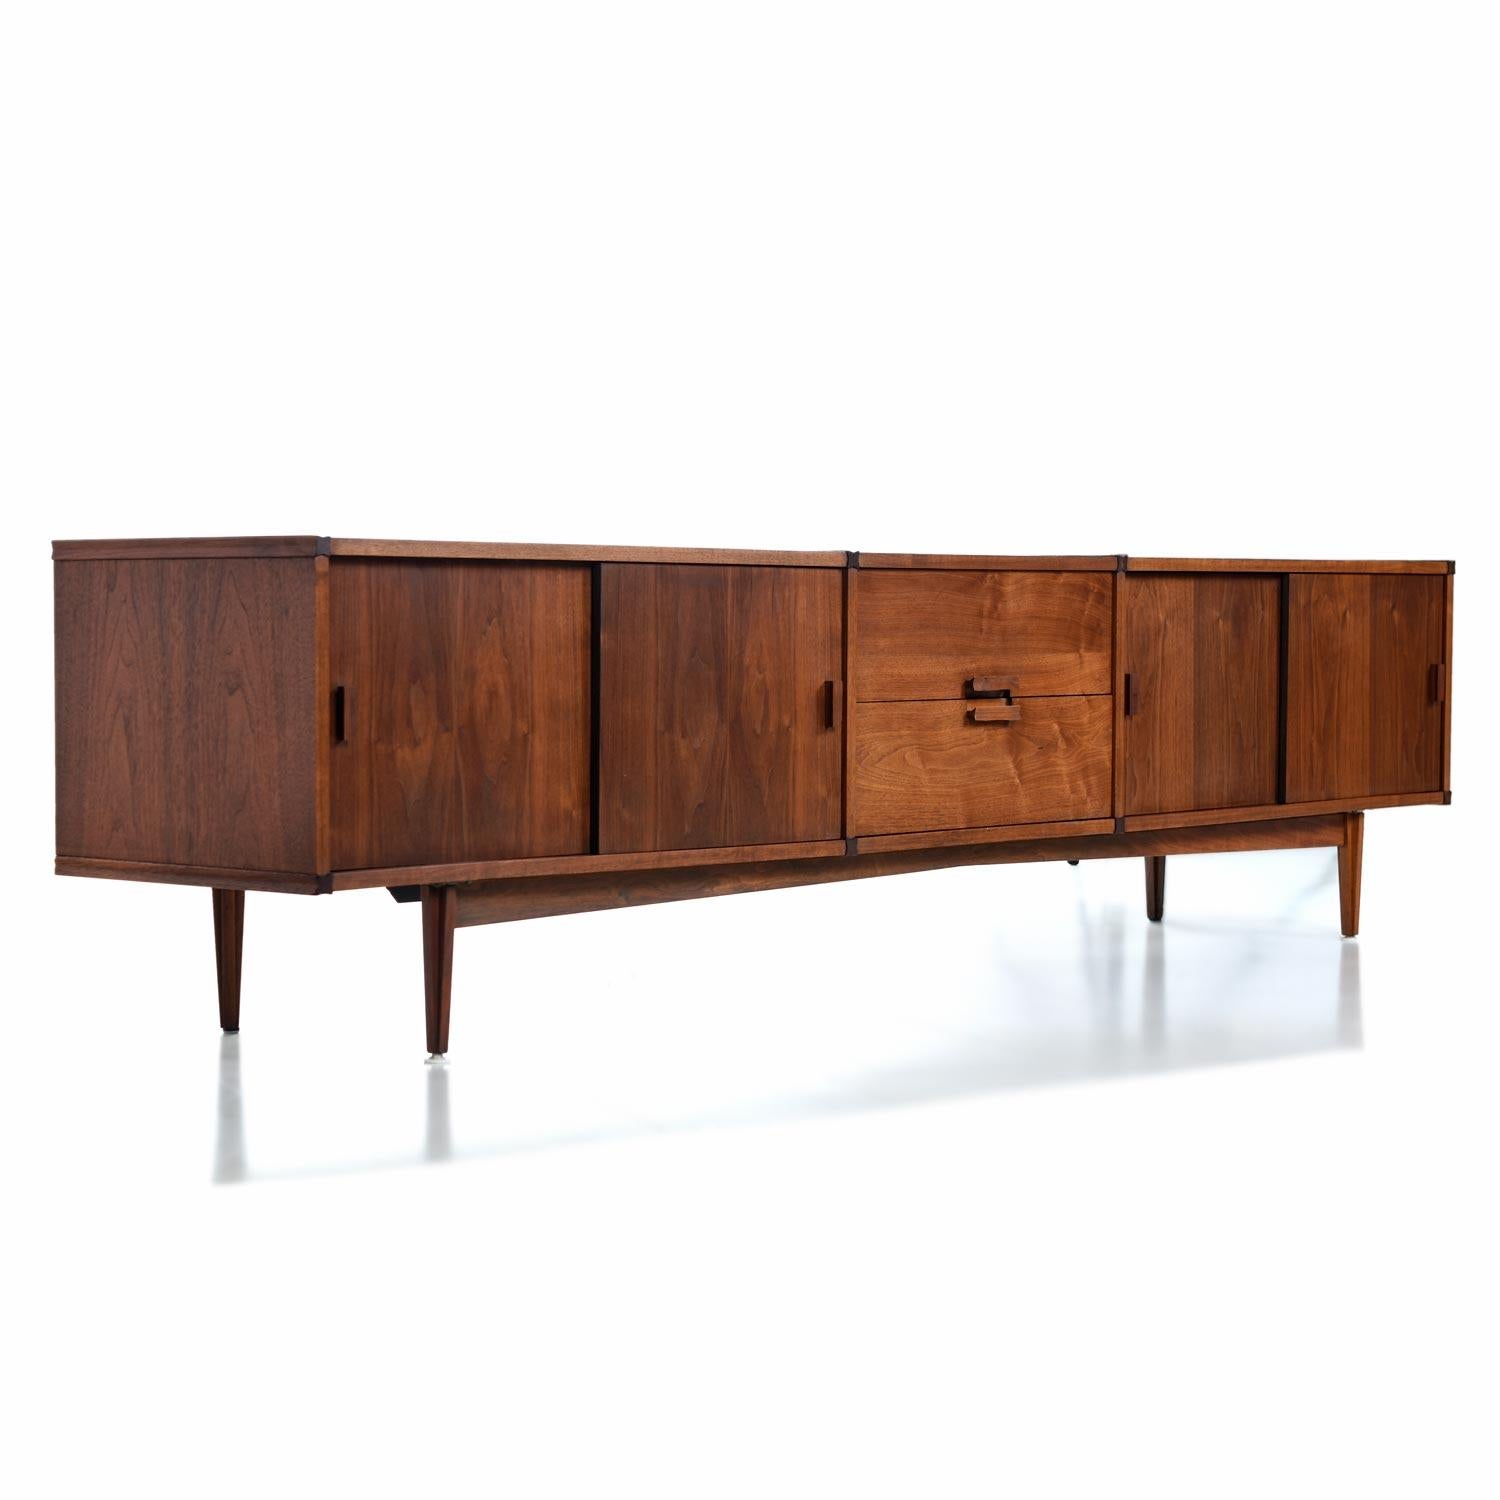 Measuring in at just under 8 feet long, this beautifully restored Mid-Century Modern American-made walnut credenza features dimensions that are nearly impossible to come by. Long, low and shallow. It's so long in fact, that the manufacturer